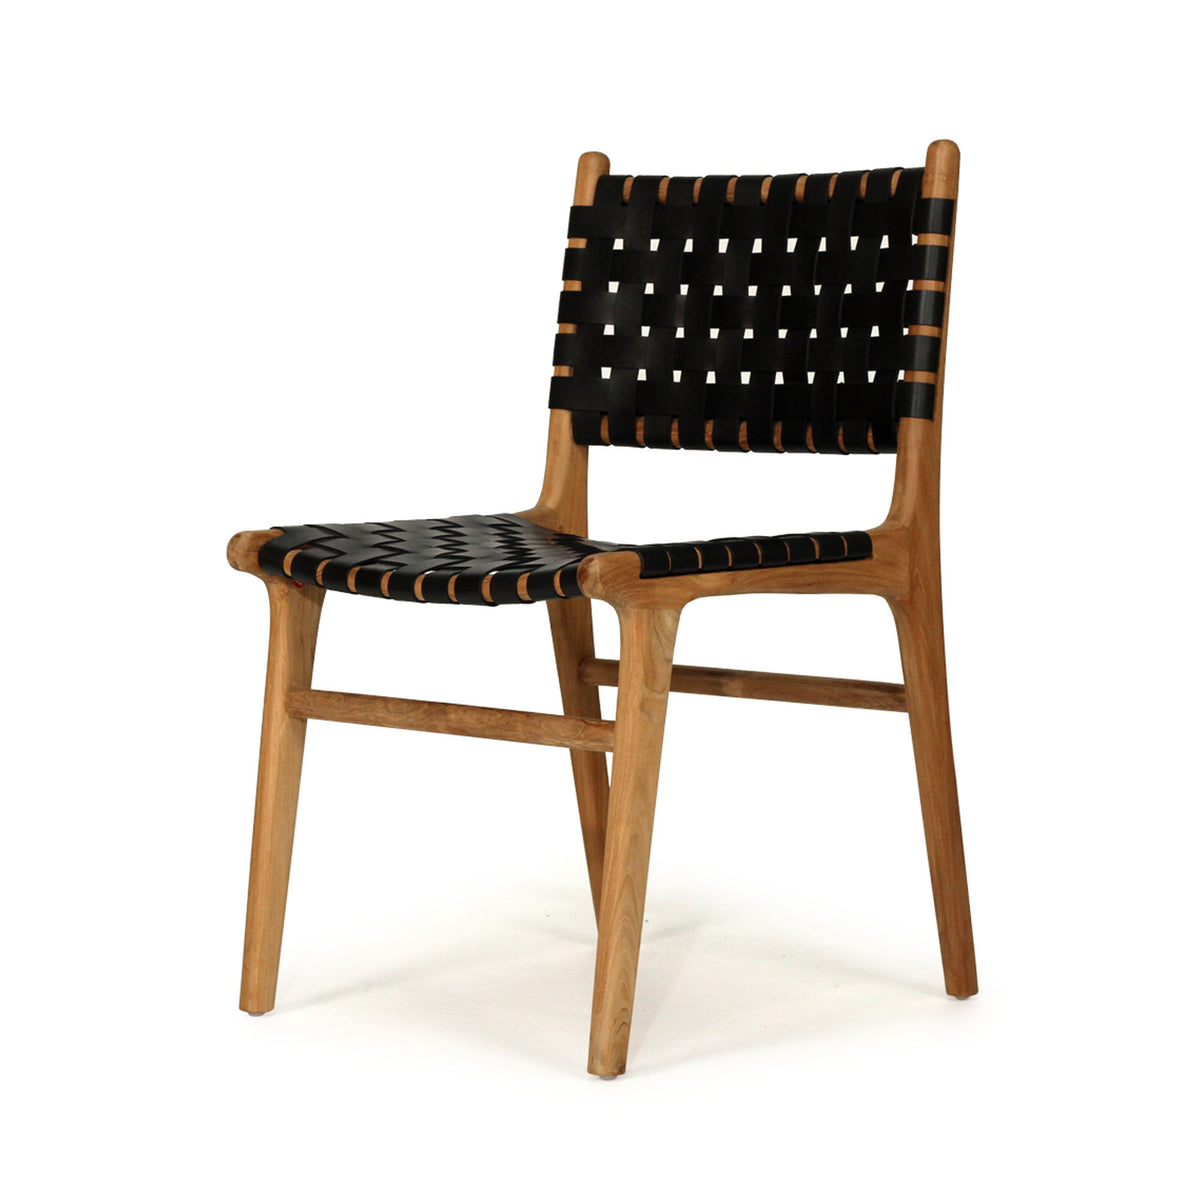 Jubilee Woven Leather Dining Chair - Black - NotBrand